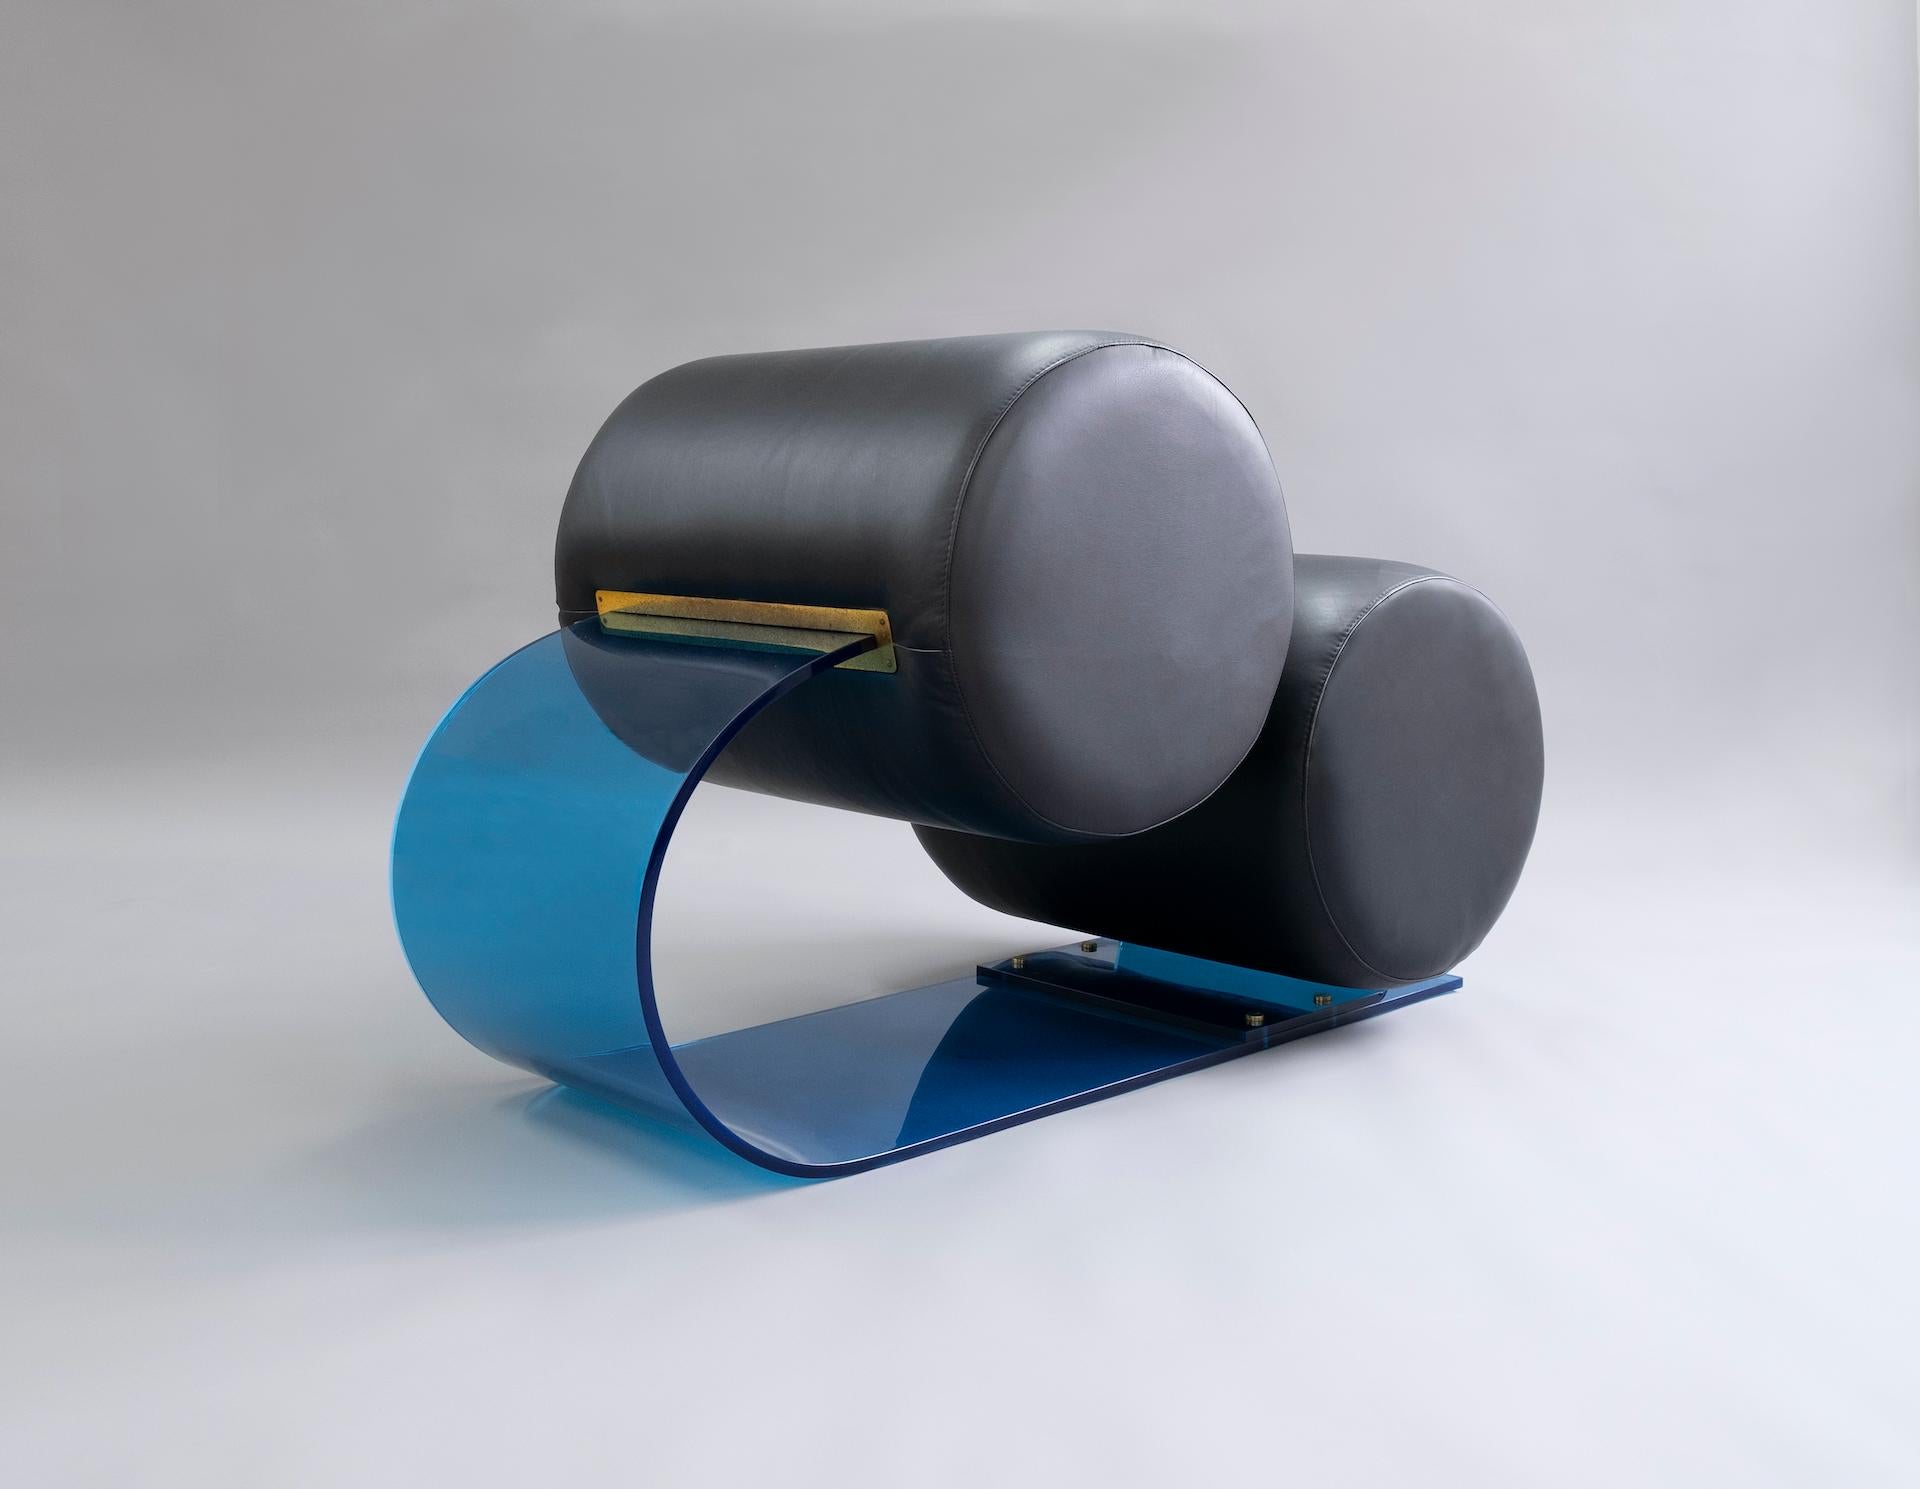 Marzio Cecchi (1940-1990)

Rare armchair sculpture built with a curved body in blue plexiglass 
and foam tubes covered with black leather making seat and backrest 
embedded in brass holders.

Only known example in blue

Italy, circa